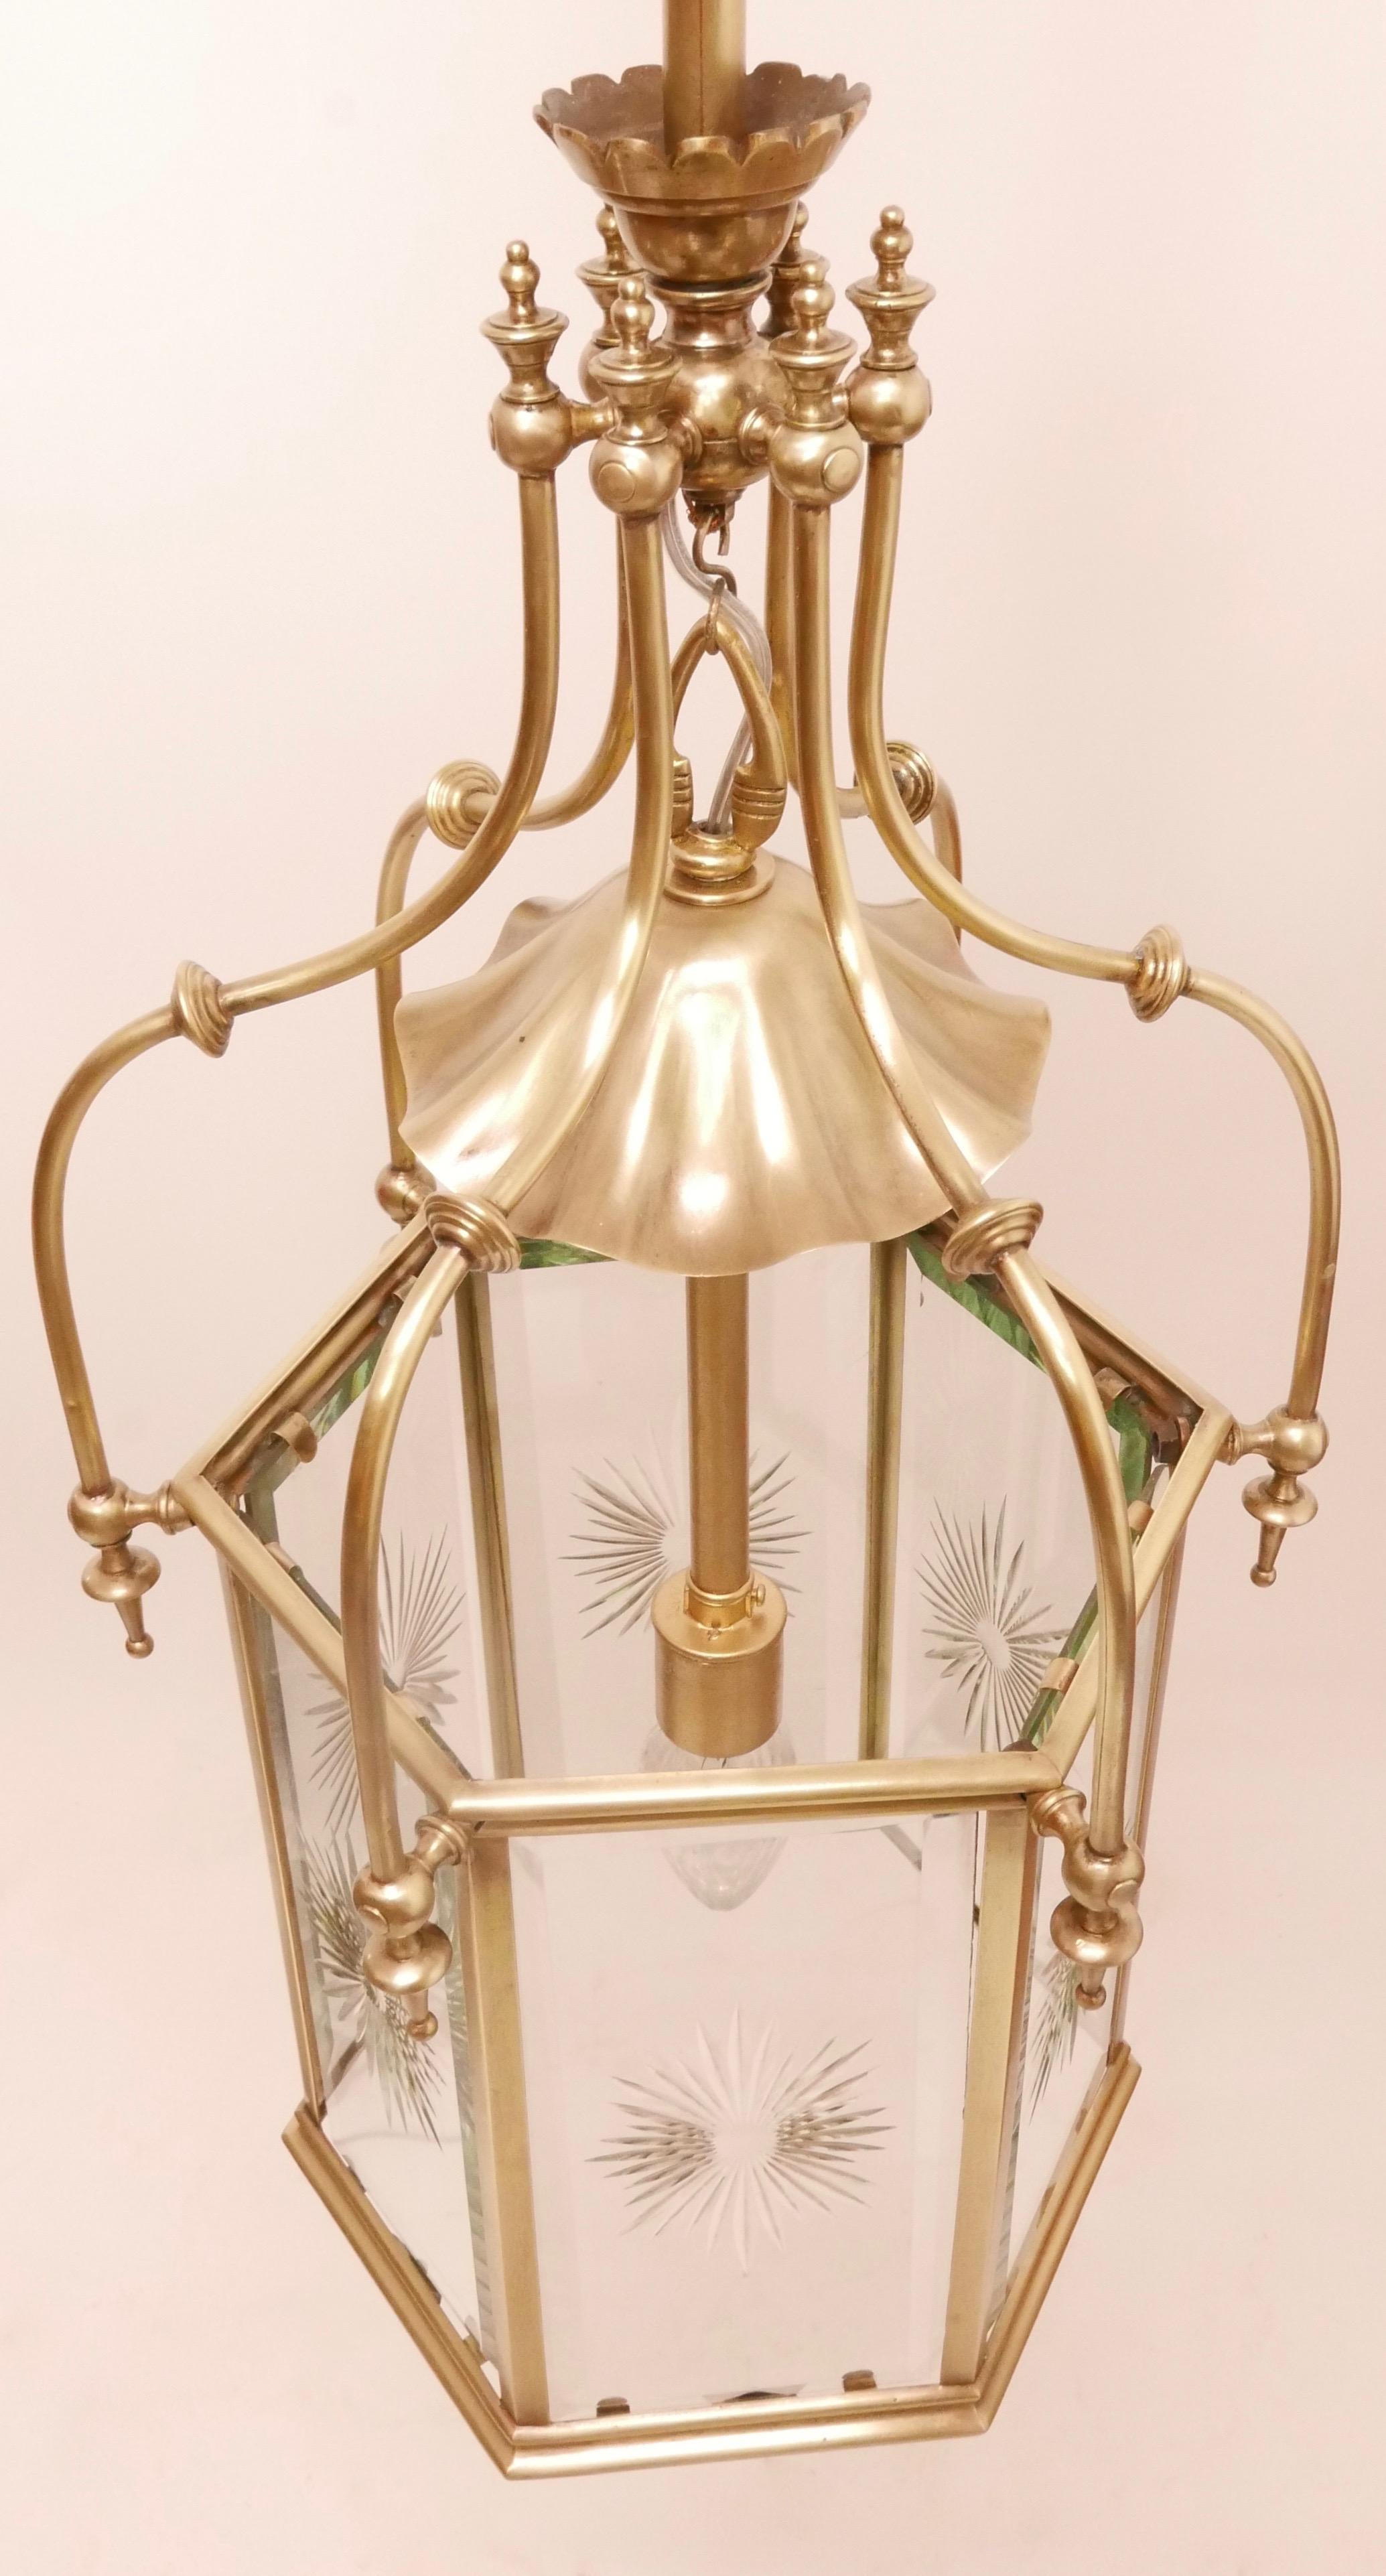 An exceptional brass and cut glass hanging entry hall or stairwell lantern, originally gas operated and recently converted to electric.
The hexagon shaped lantern has beveled glass panels with centered cut glass starbursts. 

American, late 19th